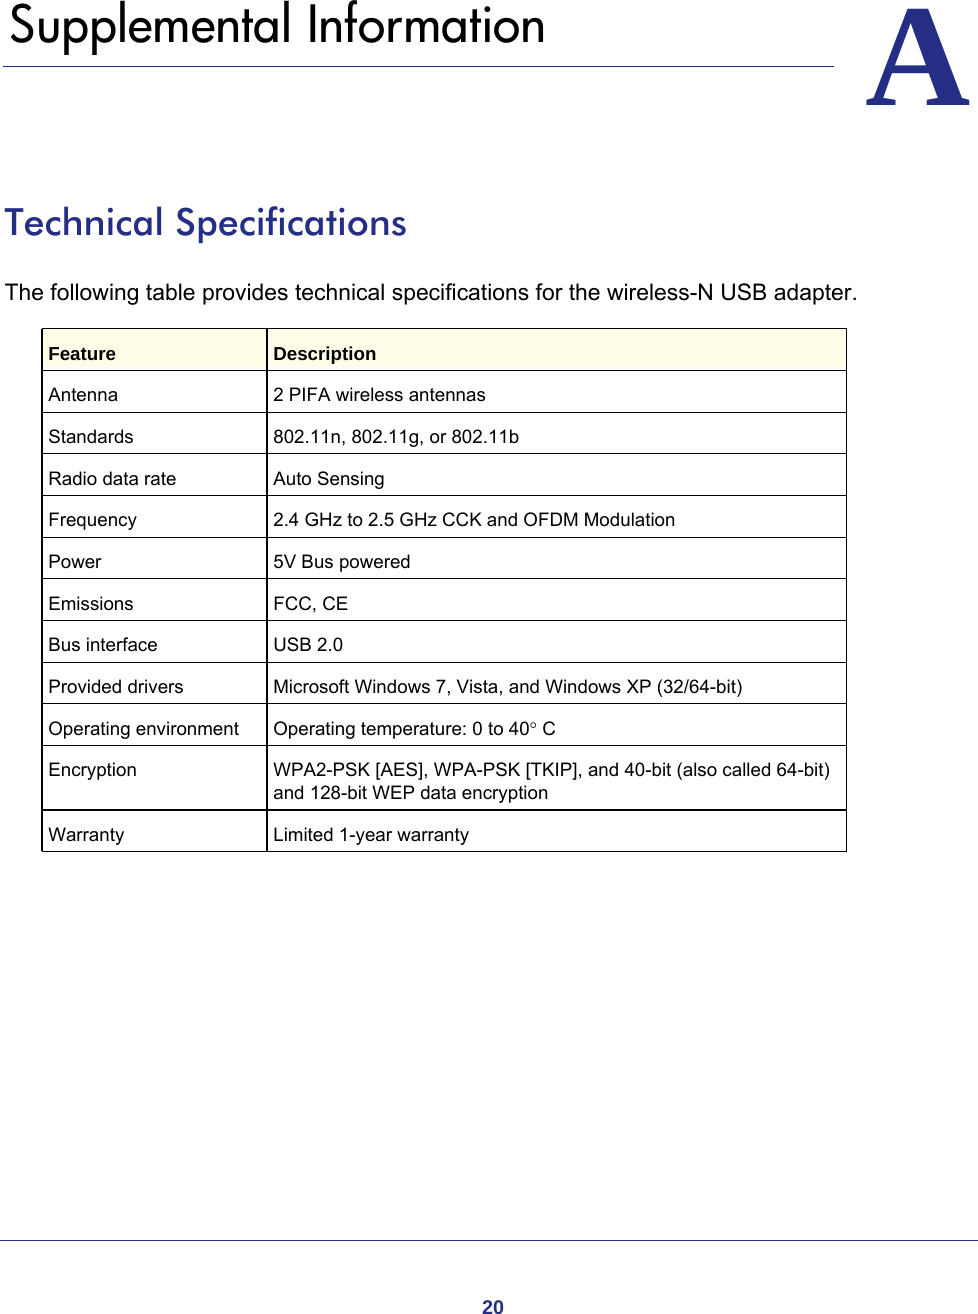 20AA.   Supplemental InformationTechnical SpecificationsThe following table provides technical specifications for the wireless-N USB adapter. Feature DescriptionAntenna 2 PIFA wireless antennasStandards  802.11n, 802.11g, or 802.11bRadio data rate Auto SensingFrequency 2.4 GHz to 2.5 GHz CCK and OFDM ModulationPower  5V Bus poweredEmissions FCC, CEBus interface USB 2.0Provided drivers Microsoft Windows 7, Vista, and Windows XP (32/64-bit)Operating environment  Operating temperature: 0 to 40 CEncryption WPA2-PSK [AES], WPA-PSK [TKIP], and 40-bit (also called 64-bit) and 128-bit WEP data encryptionWarranty Limited 1-year warranty